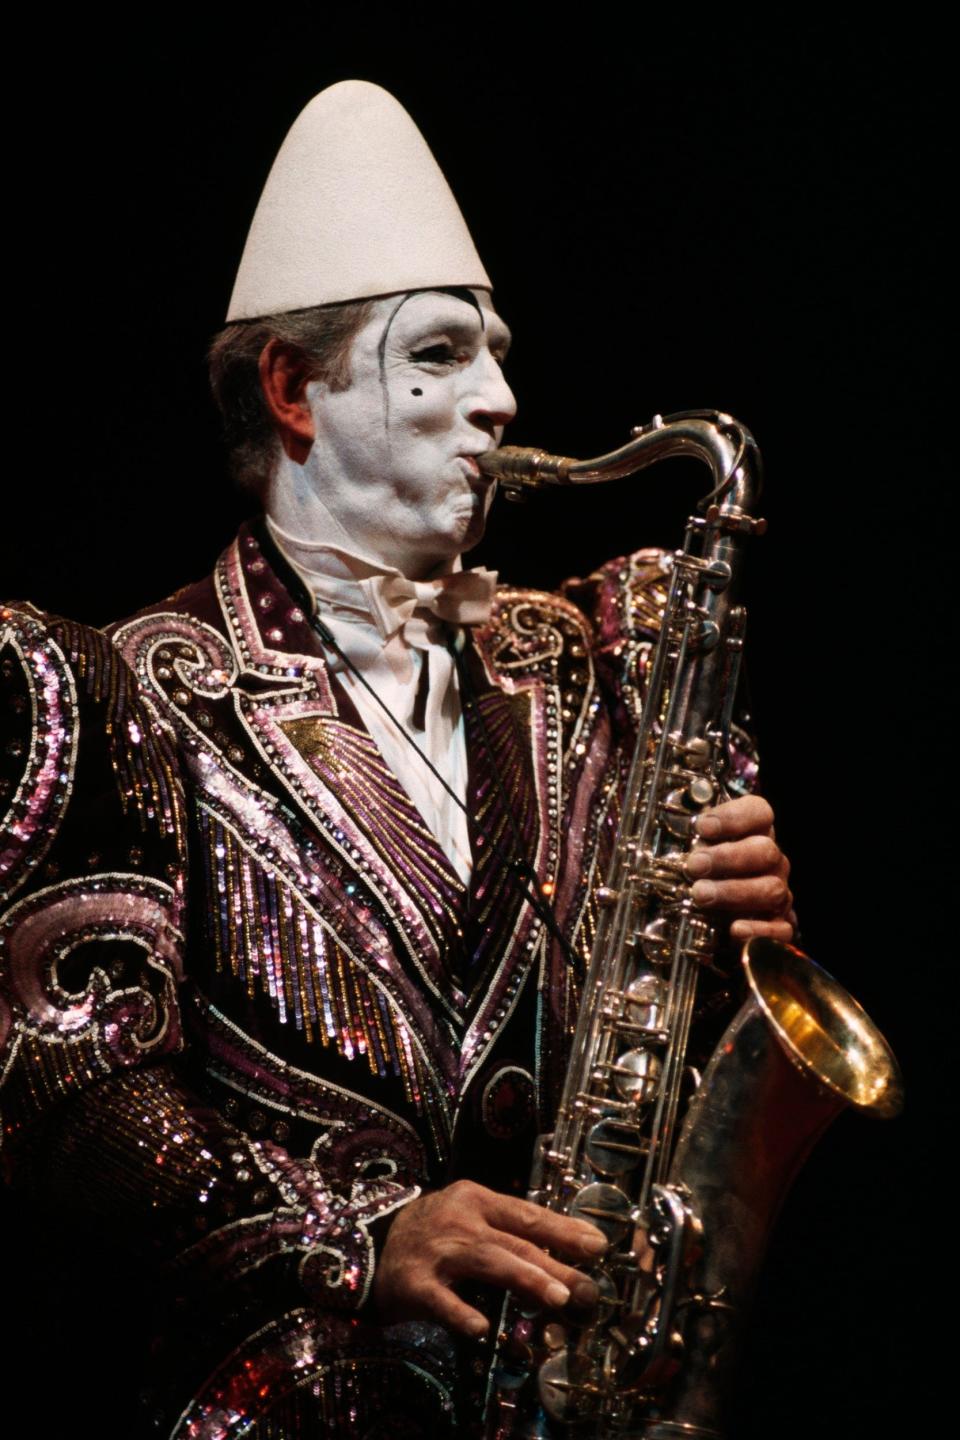 Alexis Gruss: a fine saxophonist, he worked with music arrangers and composers and sometimes played with the circus orchestra